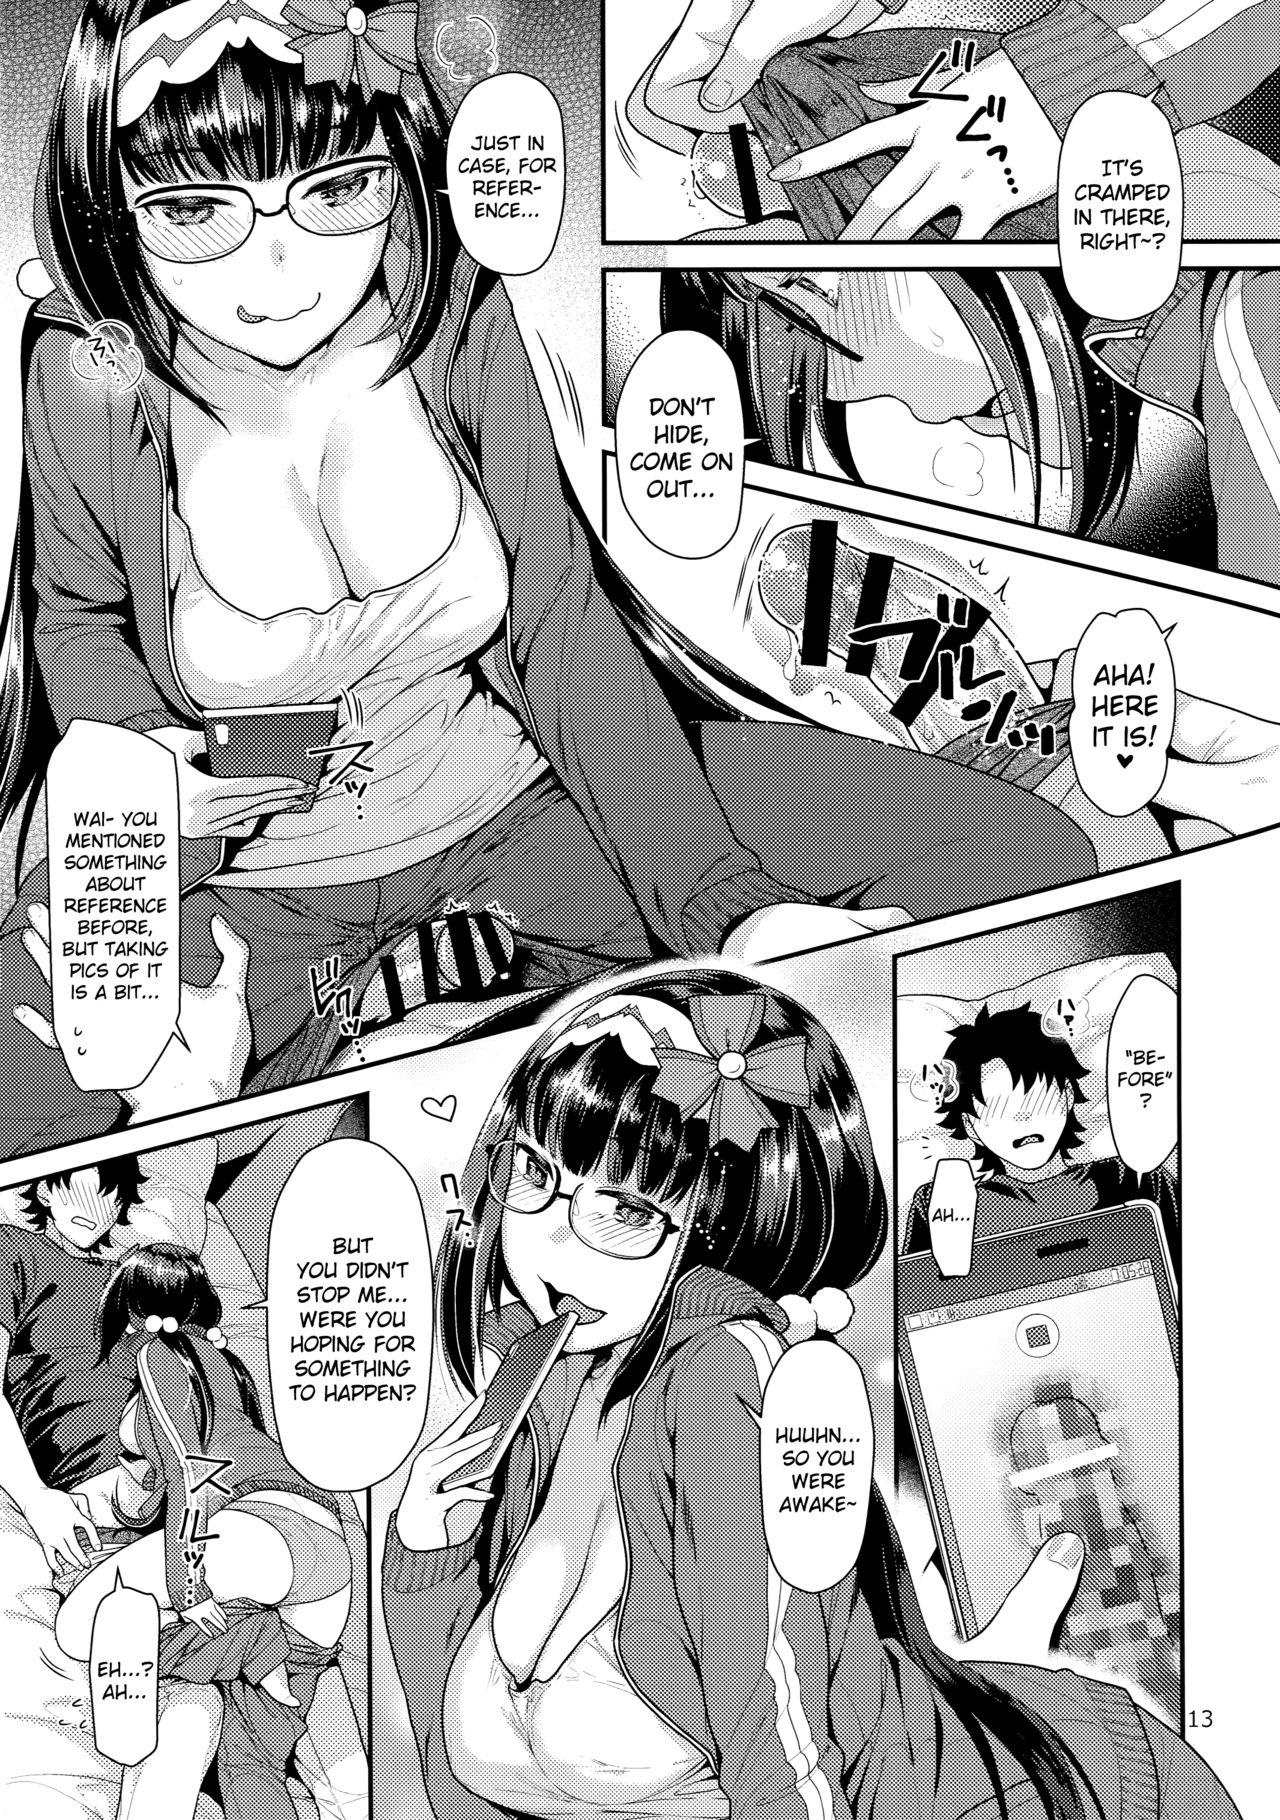 3some Midara Midareru Hime Jijou | The Dirty And Confused Girl's Circumstances - Fate grand order Sharing - Page 12